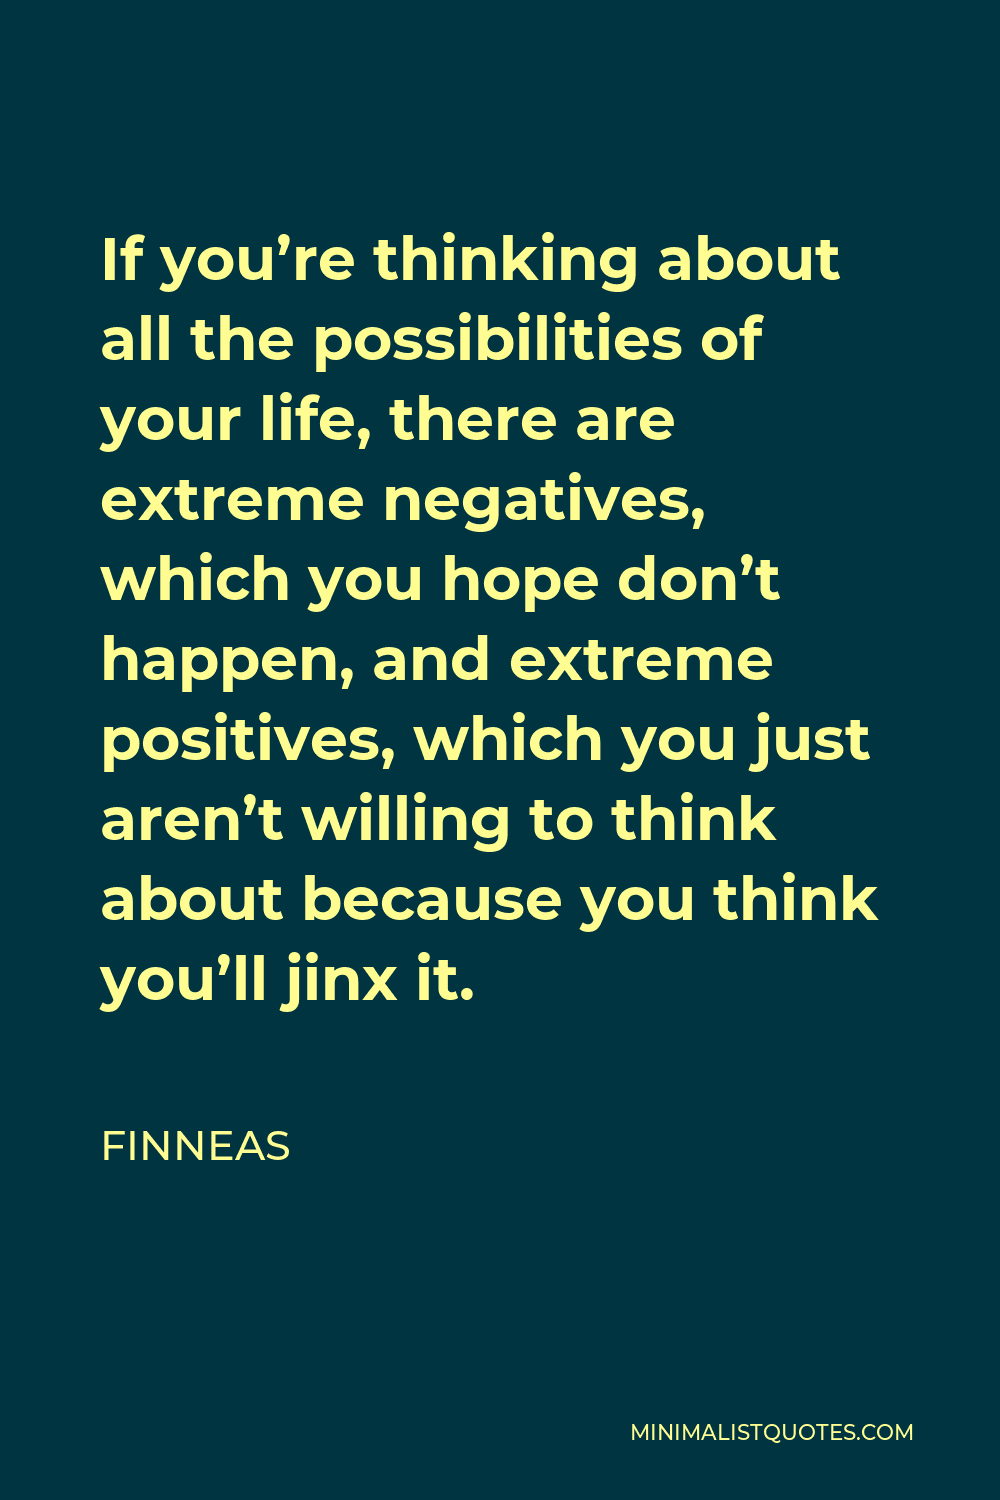 Finneas Quote - If you’re thinking about all the possibilities of your life, there are extreme negatives, which you hope don’t happen, and extreme positives, which you just aren’t willing to think about because you think you’ll jinx it.